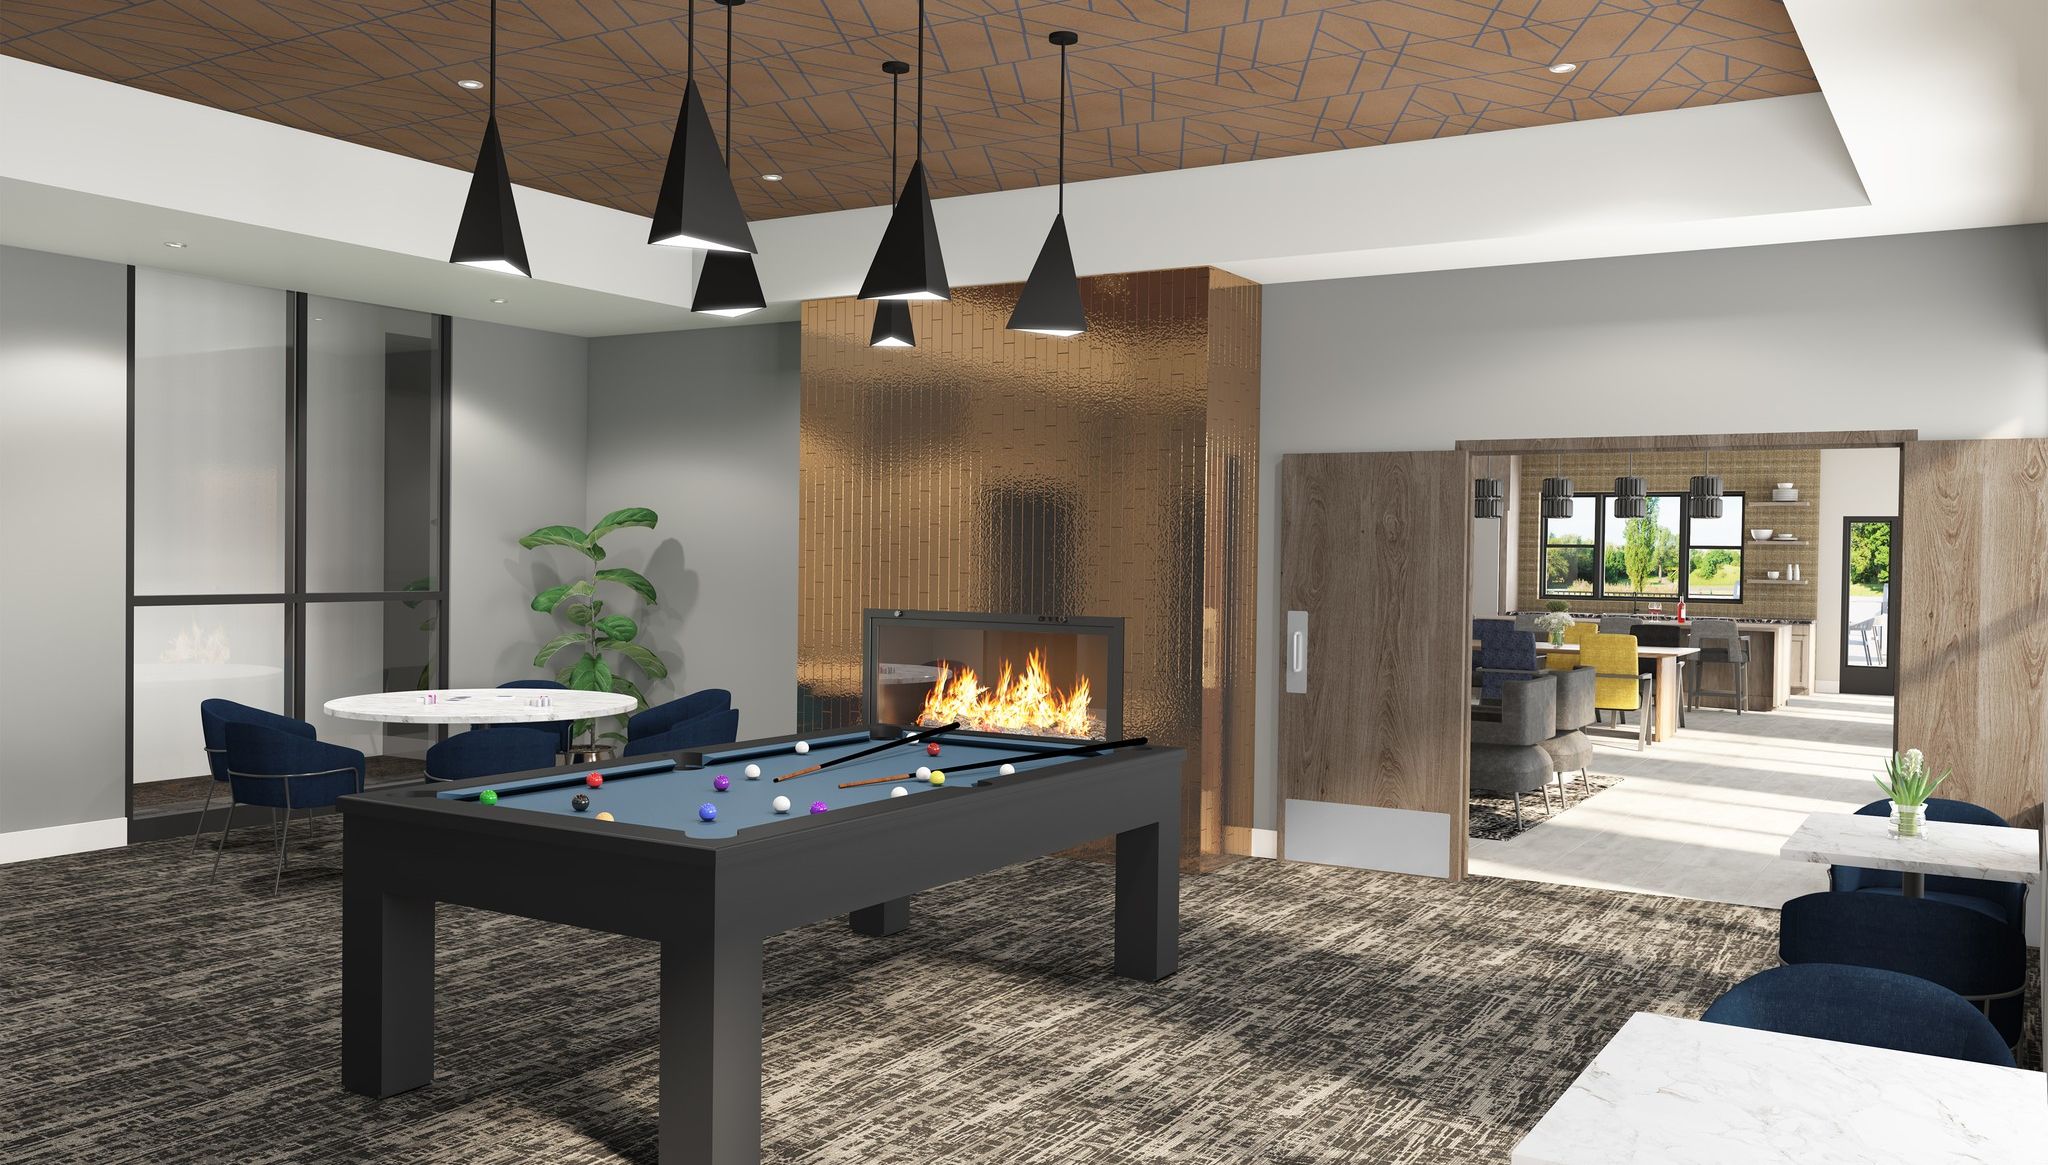 rendering of game hall amenity at Slate 55+ apartments with a fireplace and billiards table